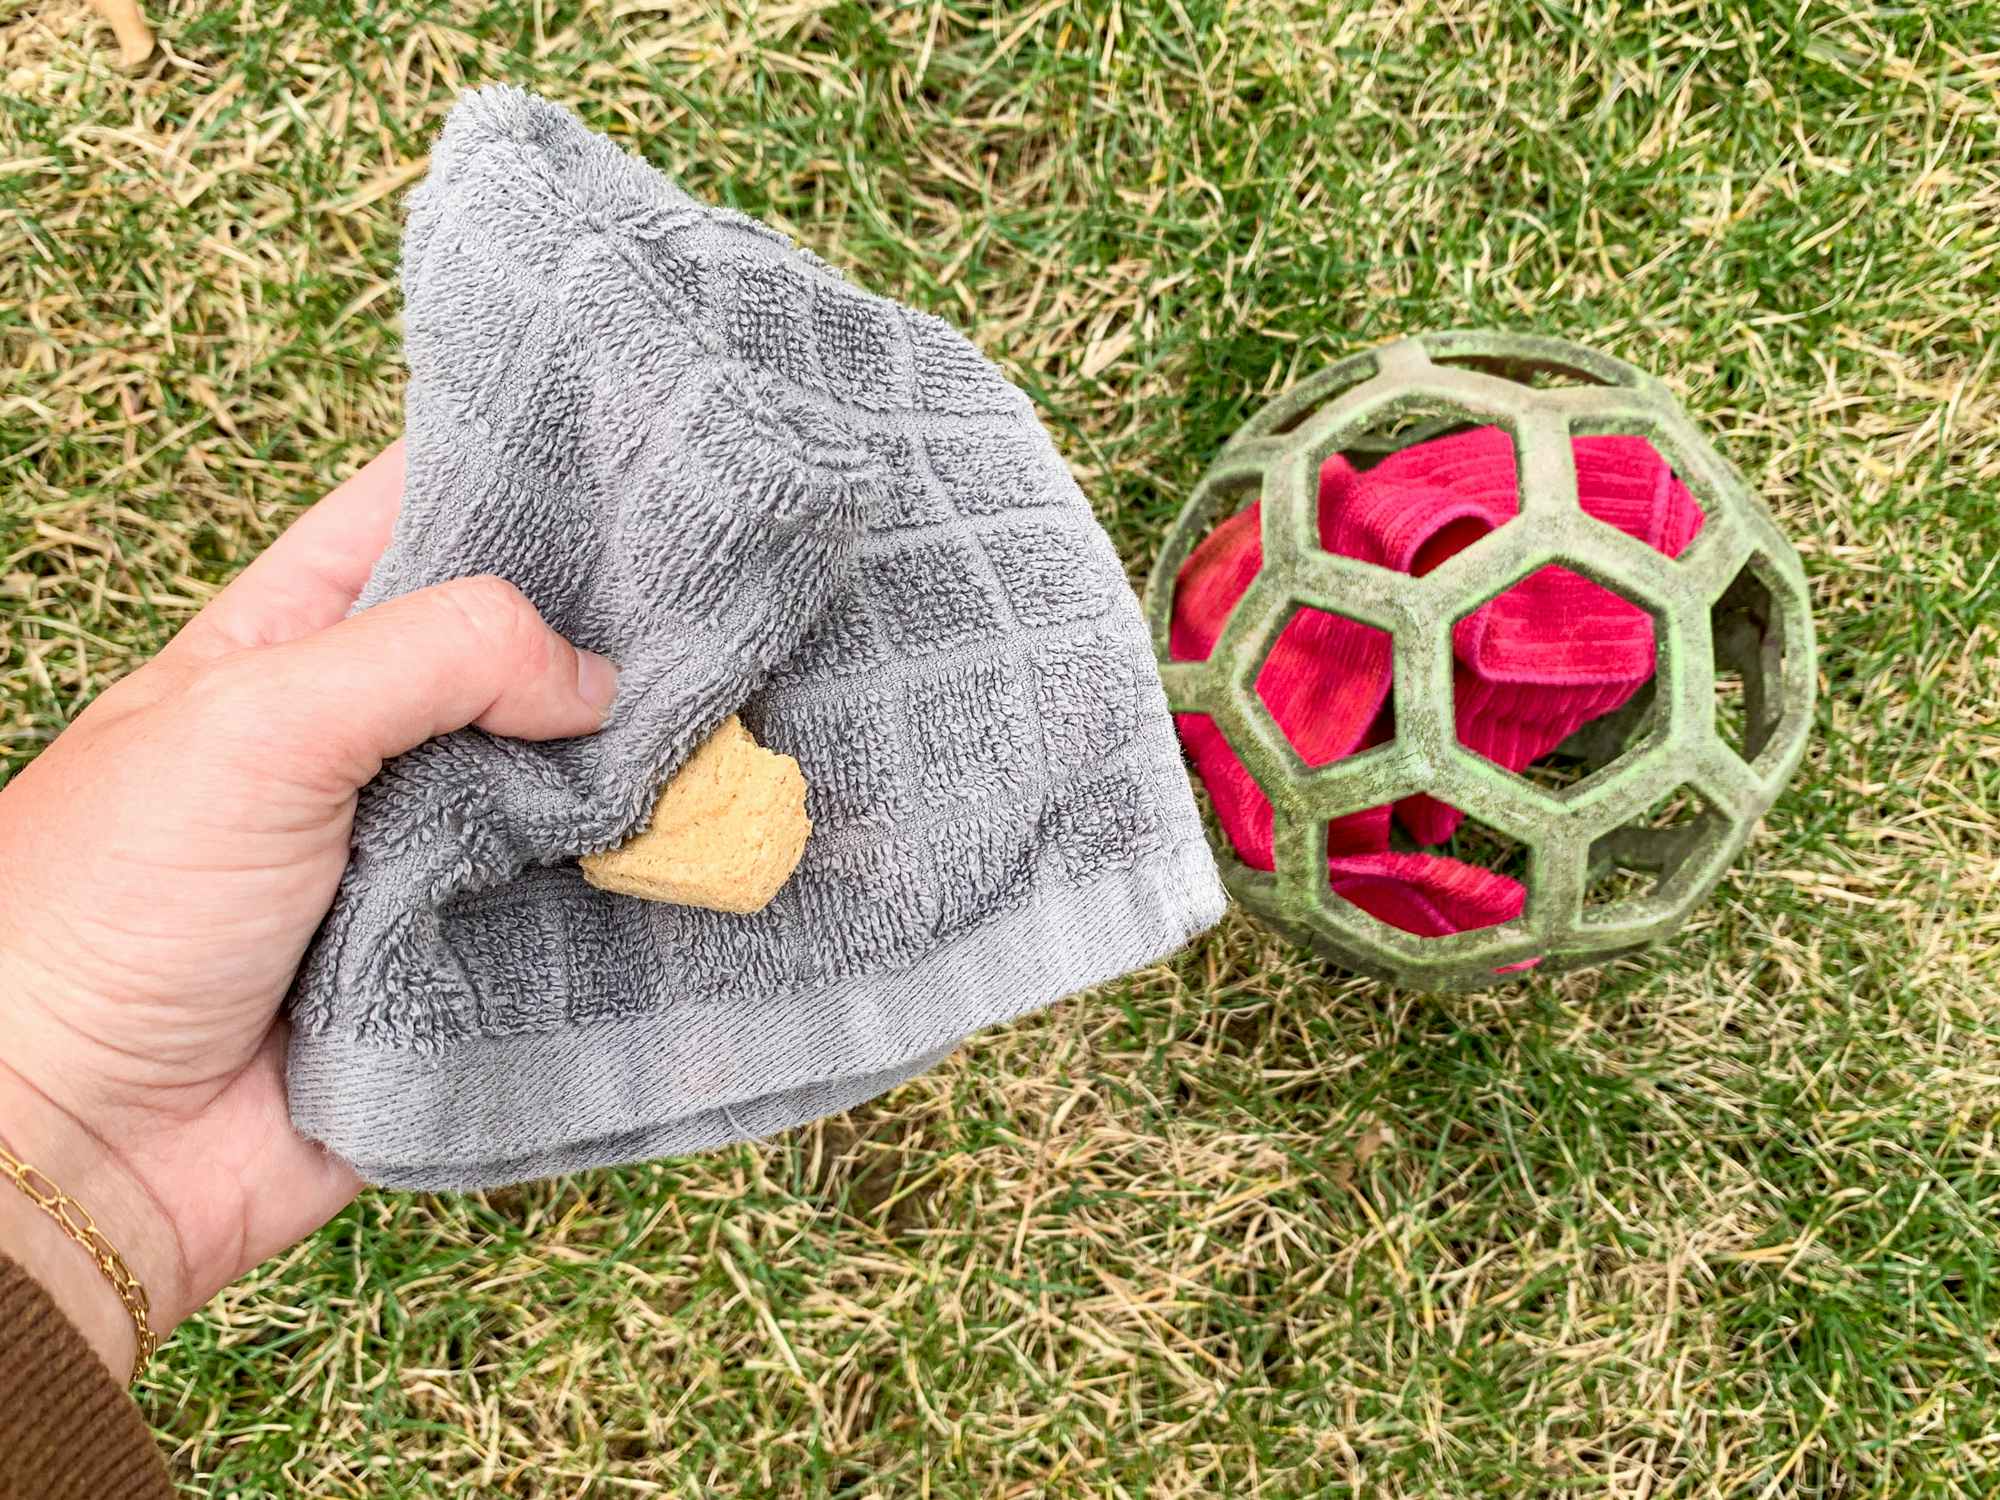 a person stuffing a ball with old wash cloths and treats